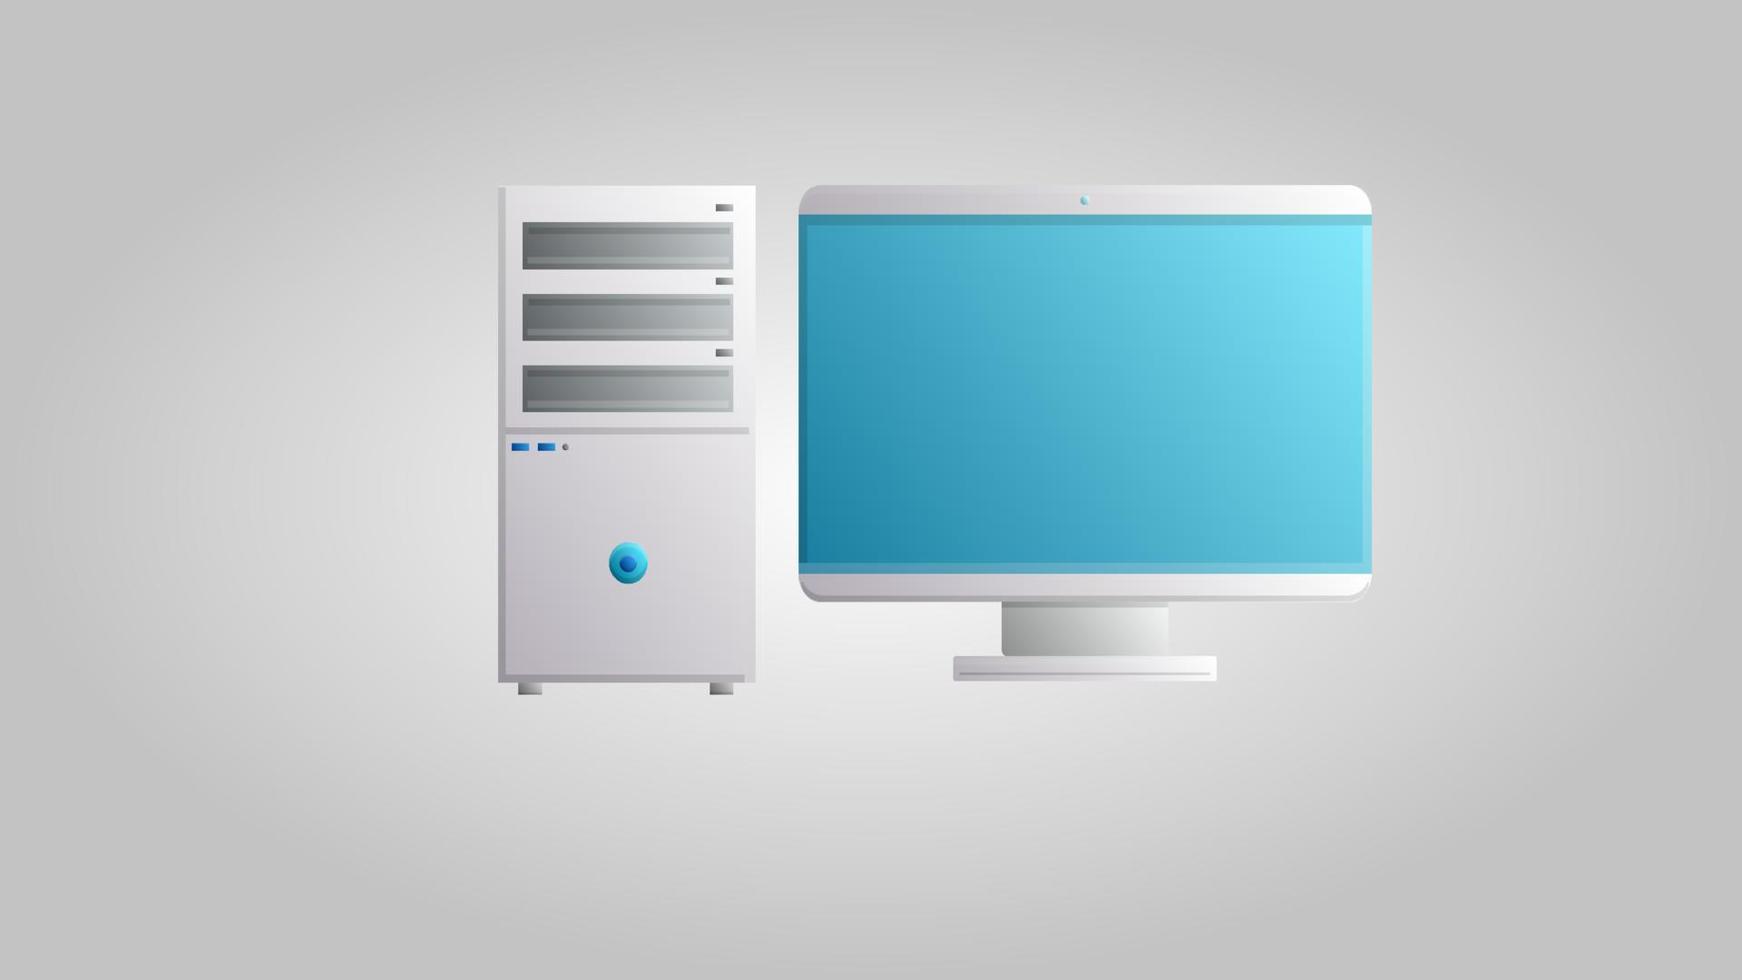 Digital modern new stationary office computer for games, work and entertainment on a white background. Vector illustration